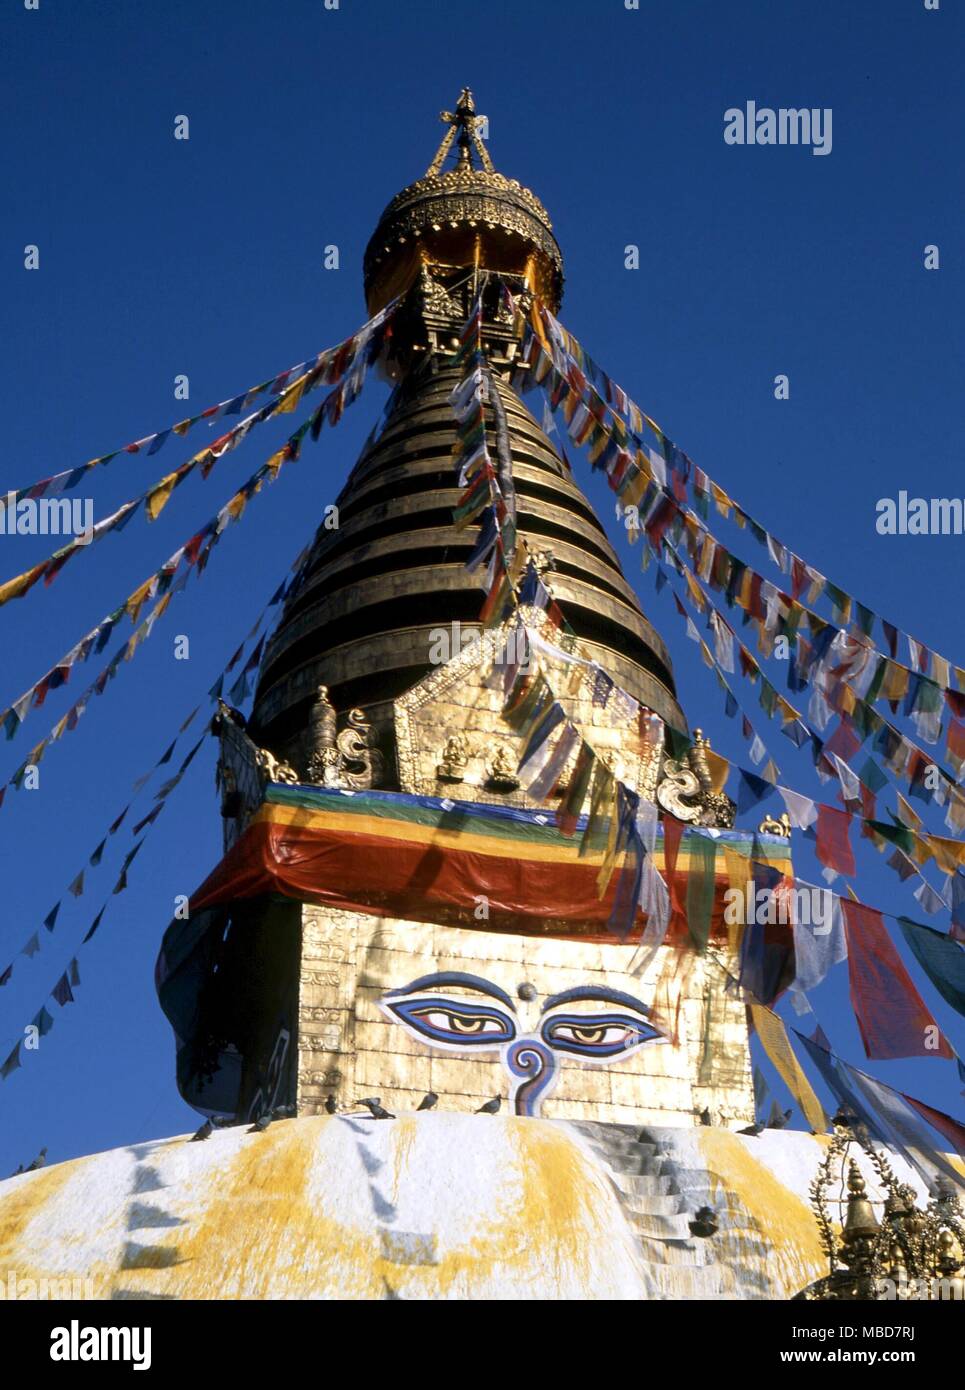 THIRD EYE - The symbol of the third eye, the ek (the number one, symbol of unity) between the two eyes of God, on the tower of the Swayambhunath temple, Kathmandu, Nepal Stock Photo